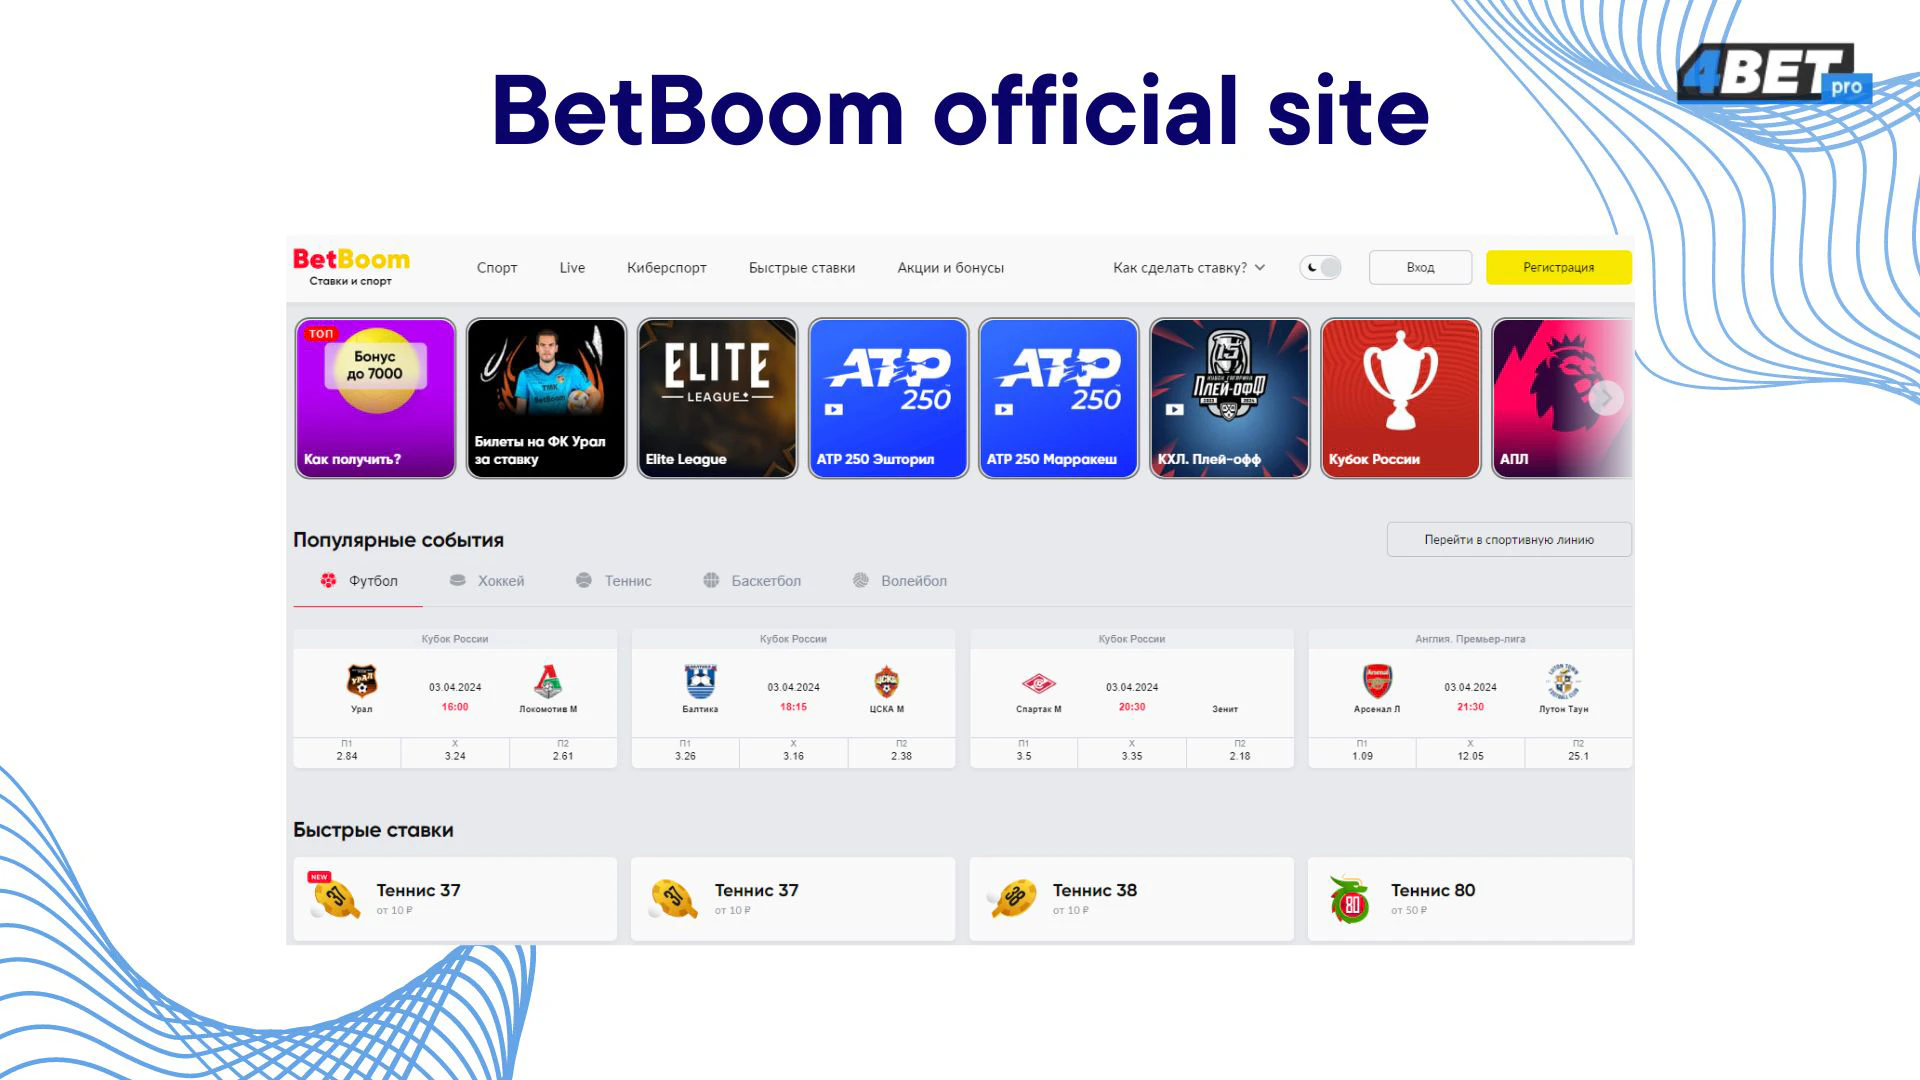 Bet Boom official site